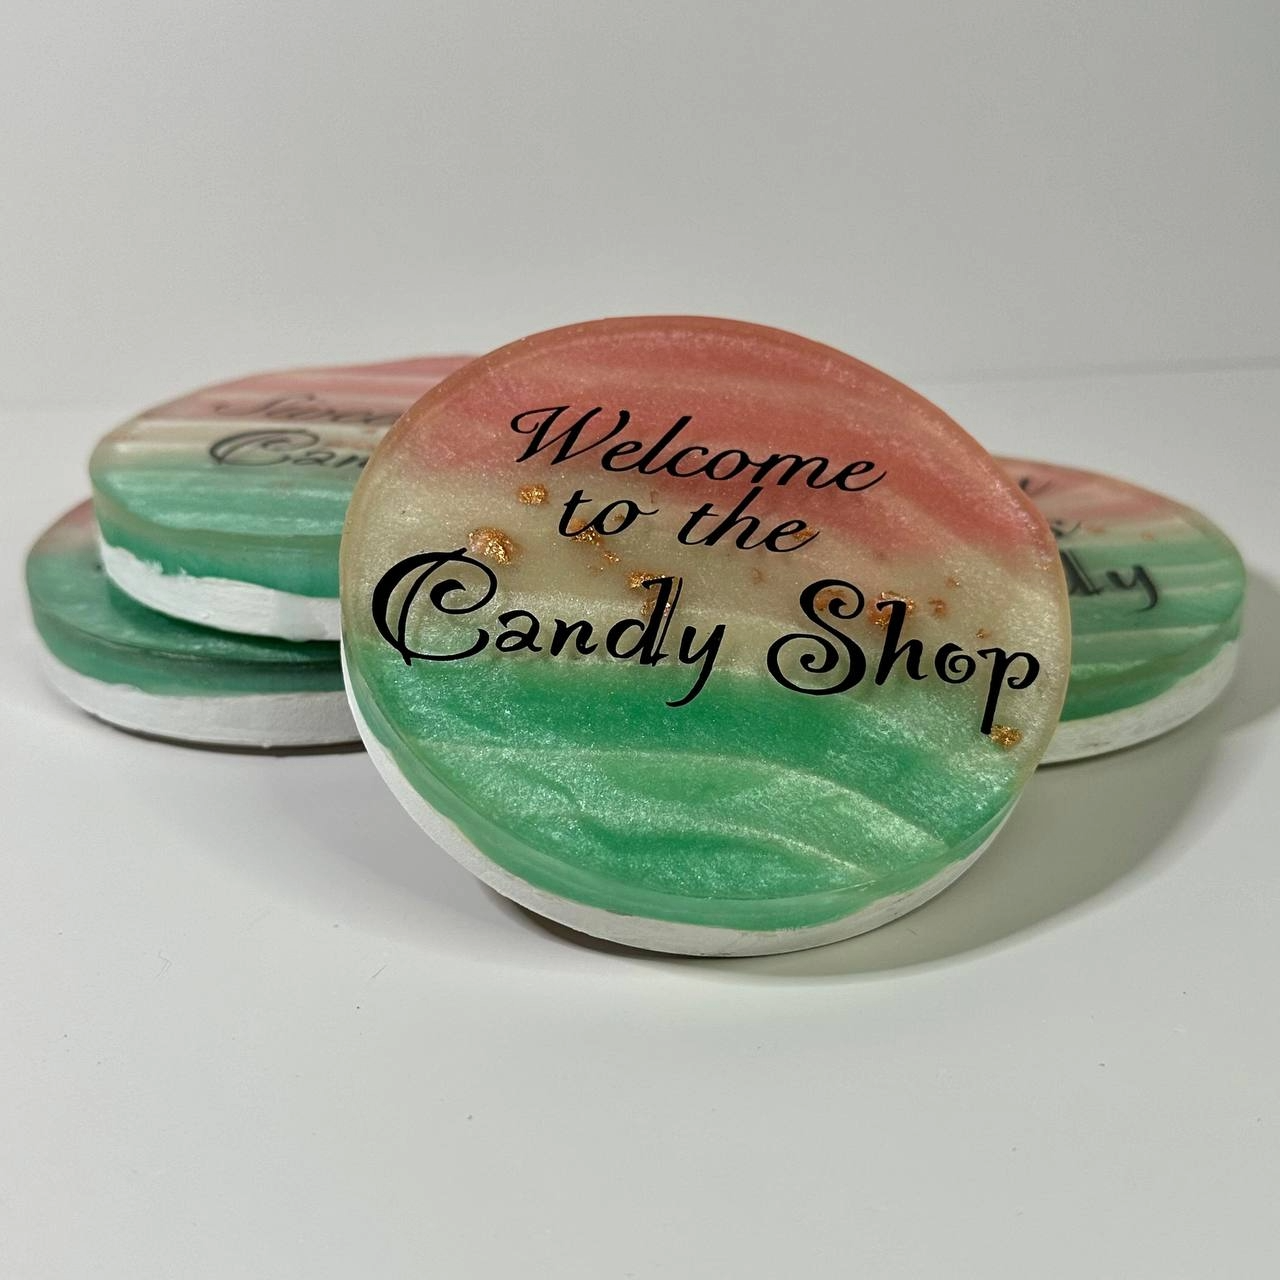 Candy Land Coasters